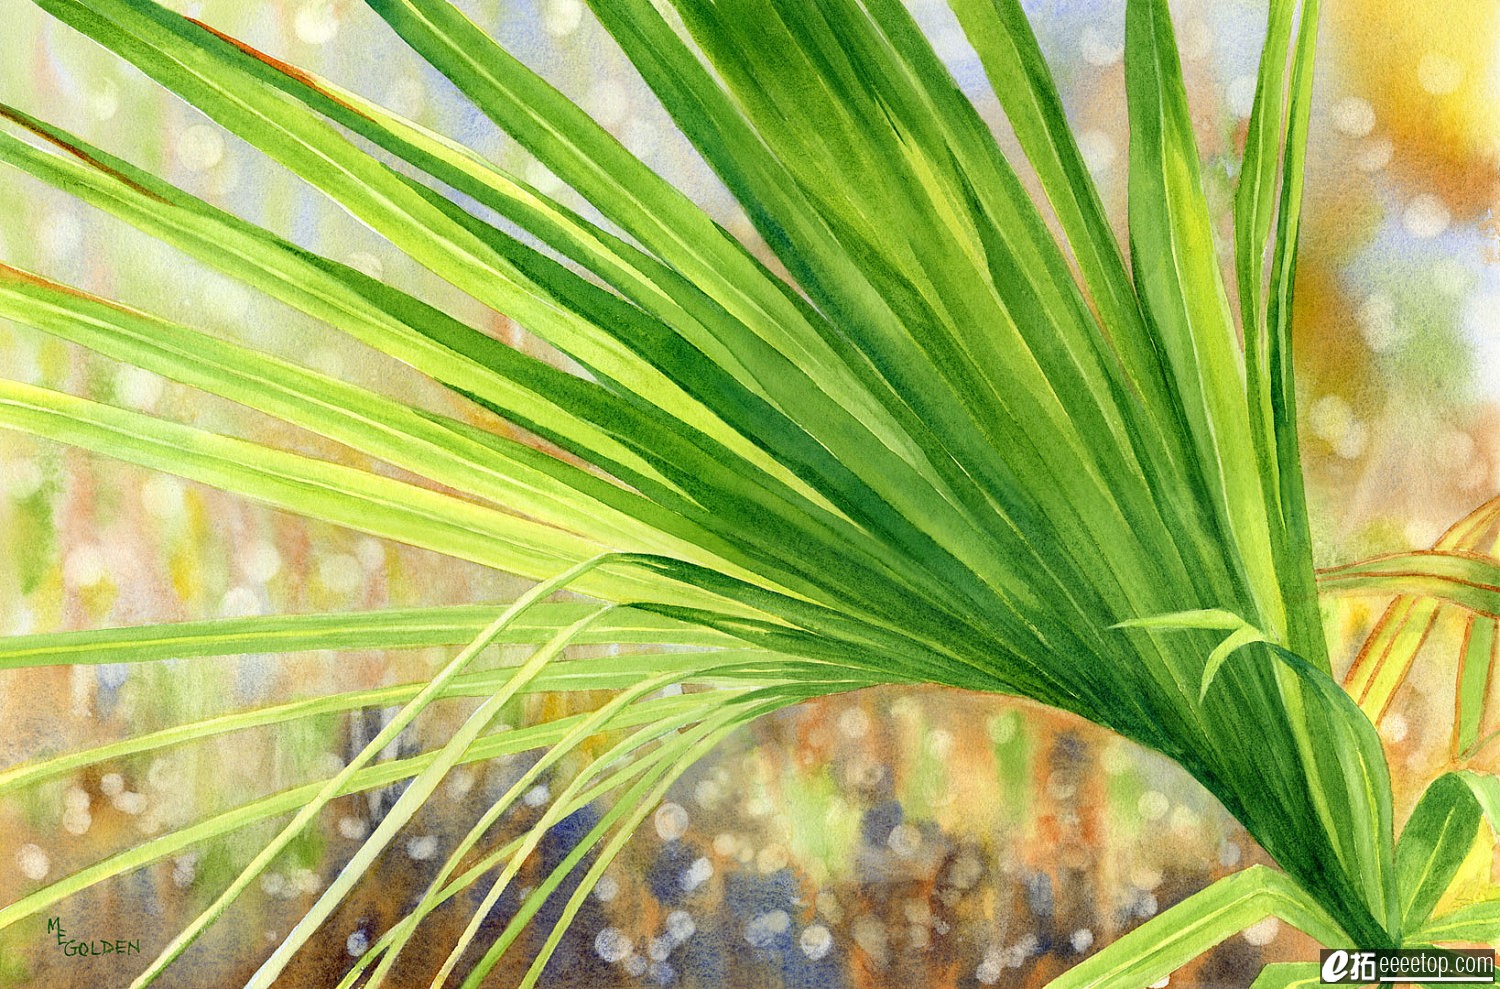 Palm Frond with sunlight shining through.jpg